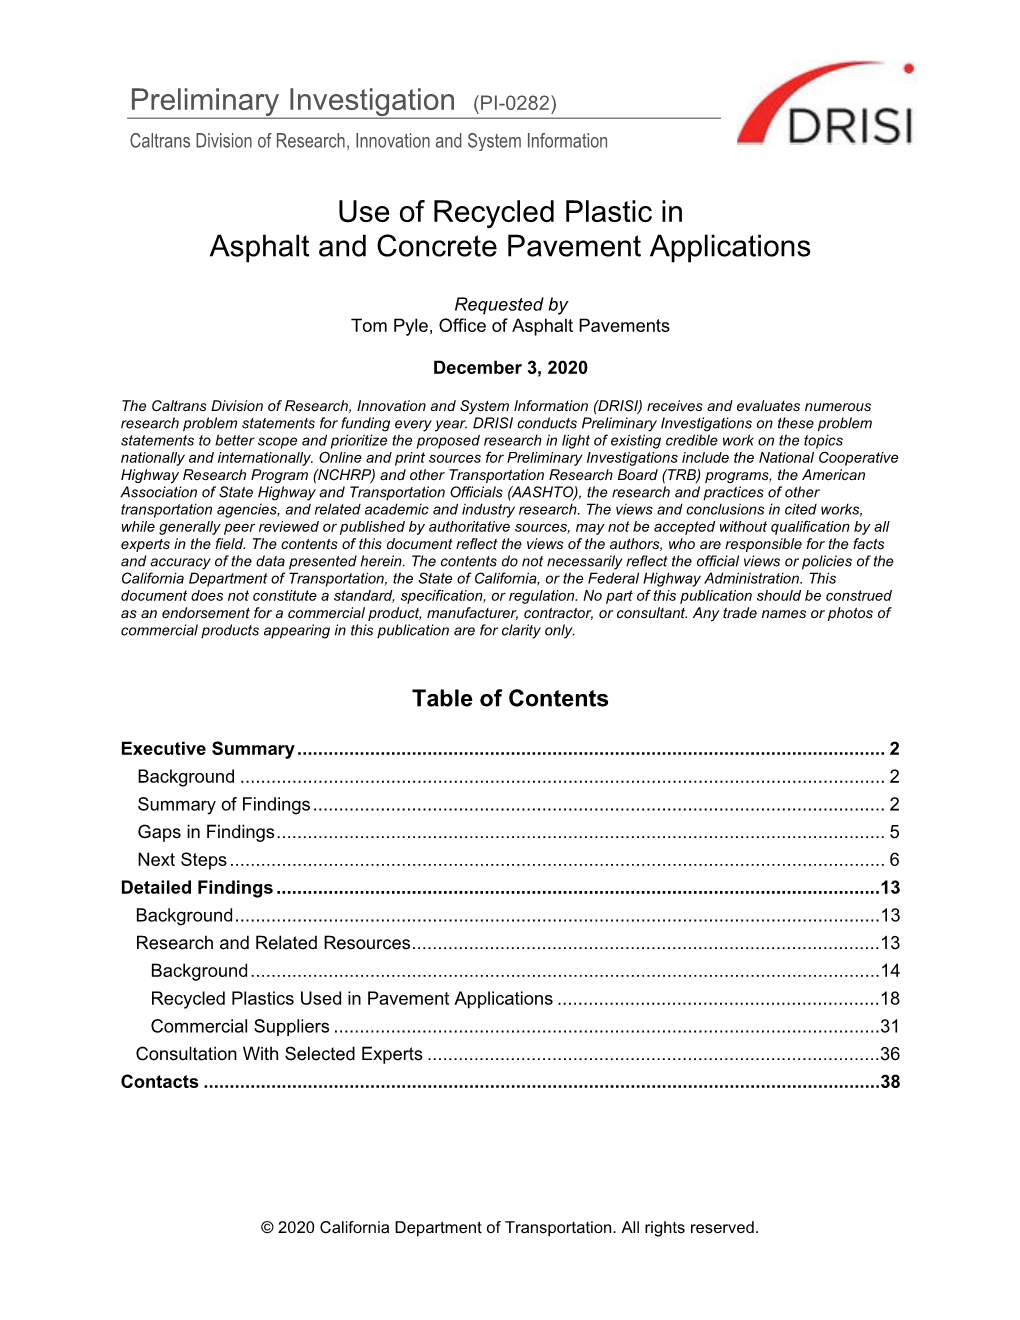 Use of Recycled Plastic in Asphalt and Concrete Pavement Applications